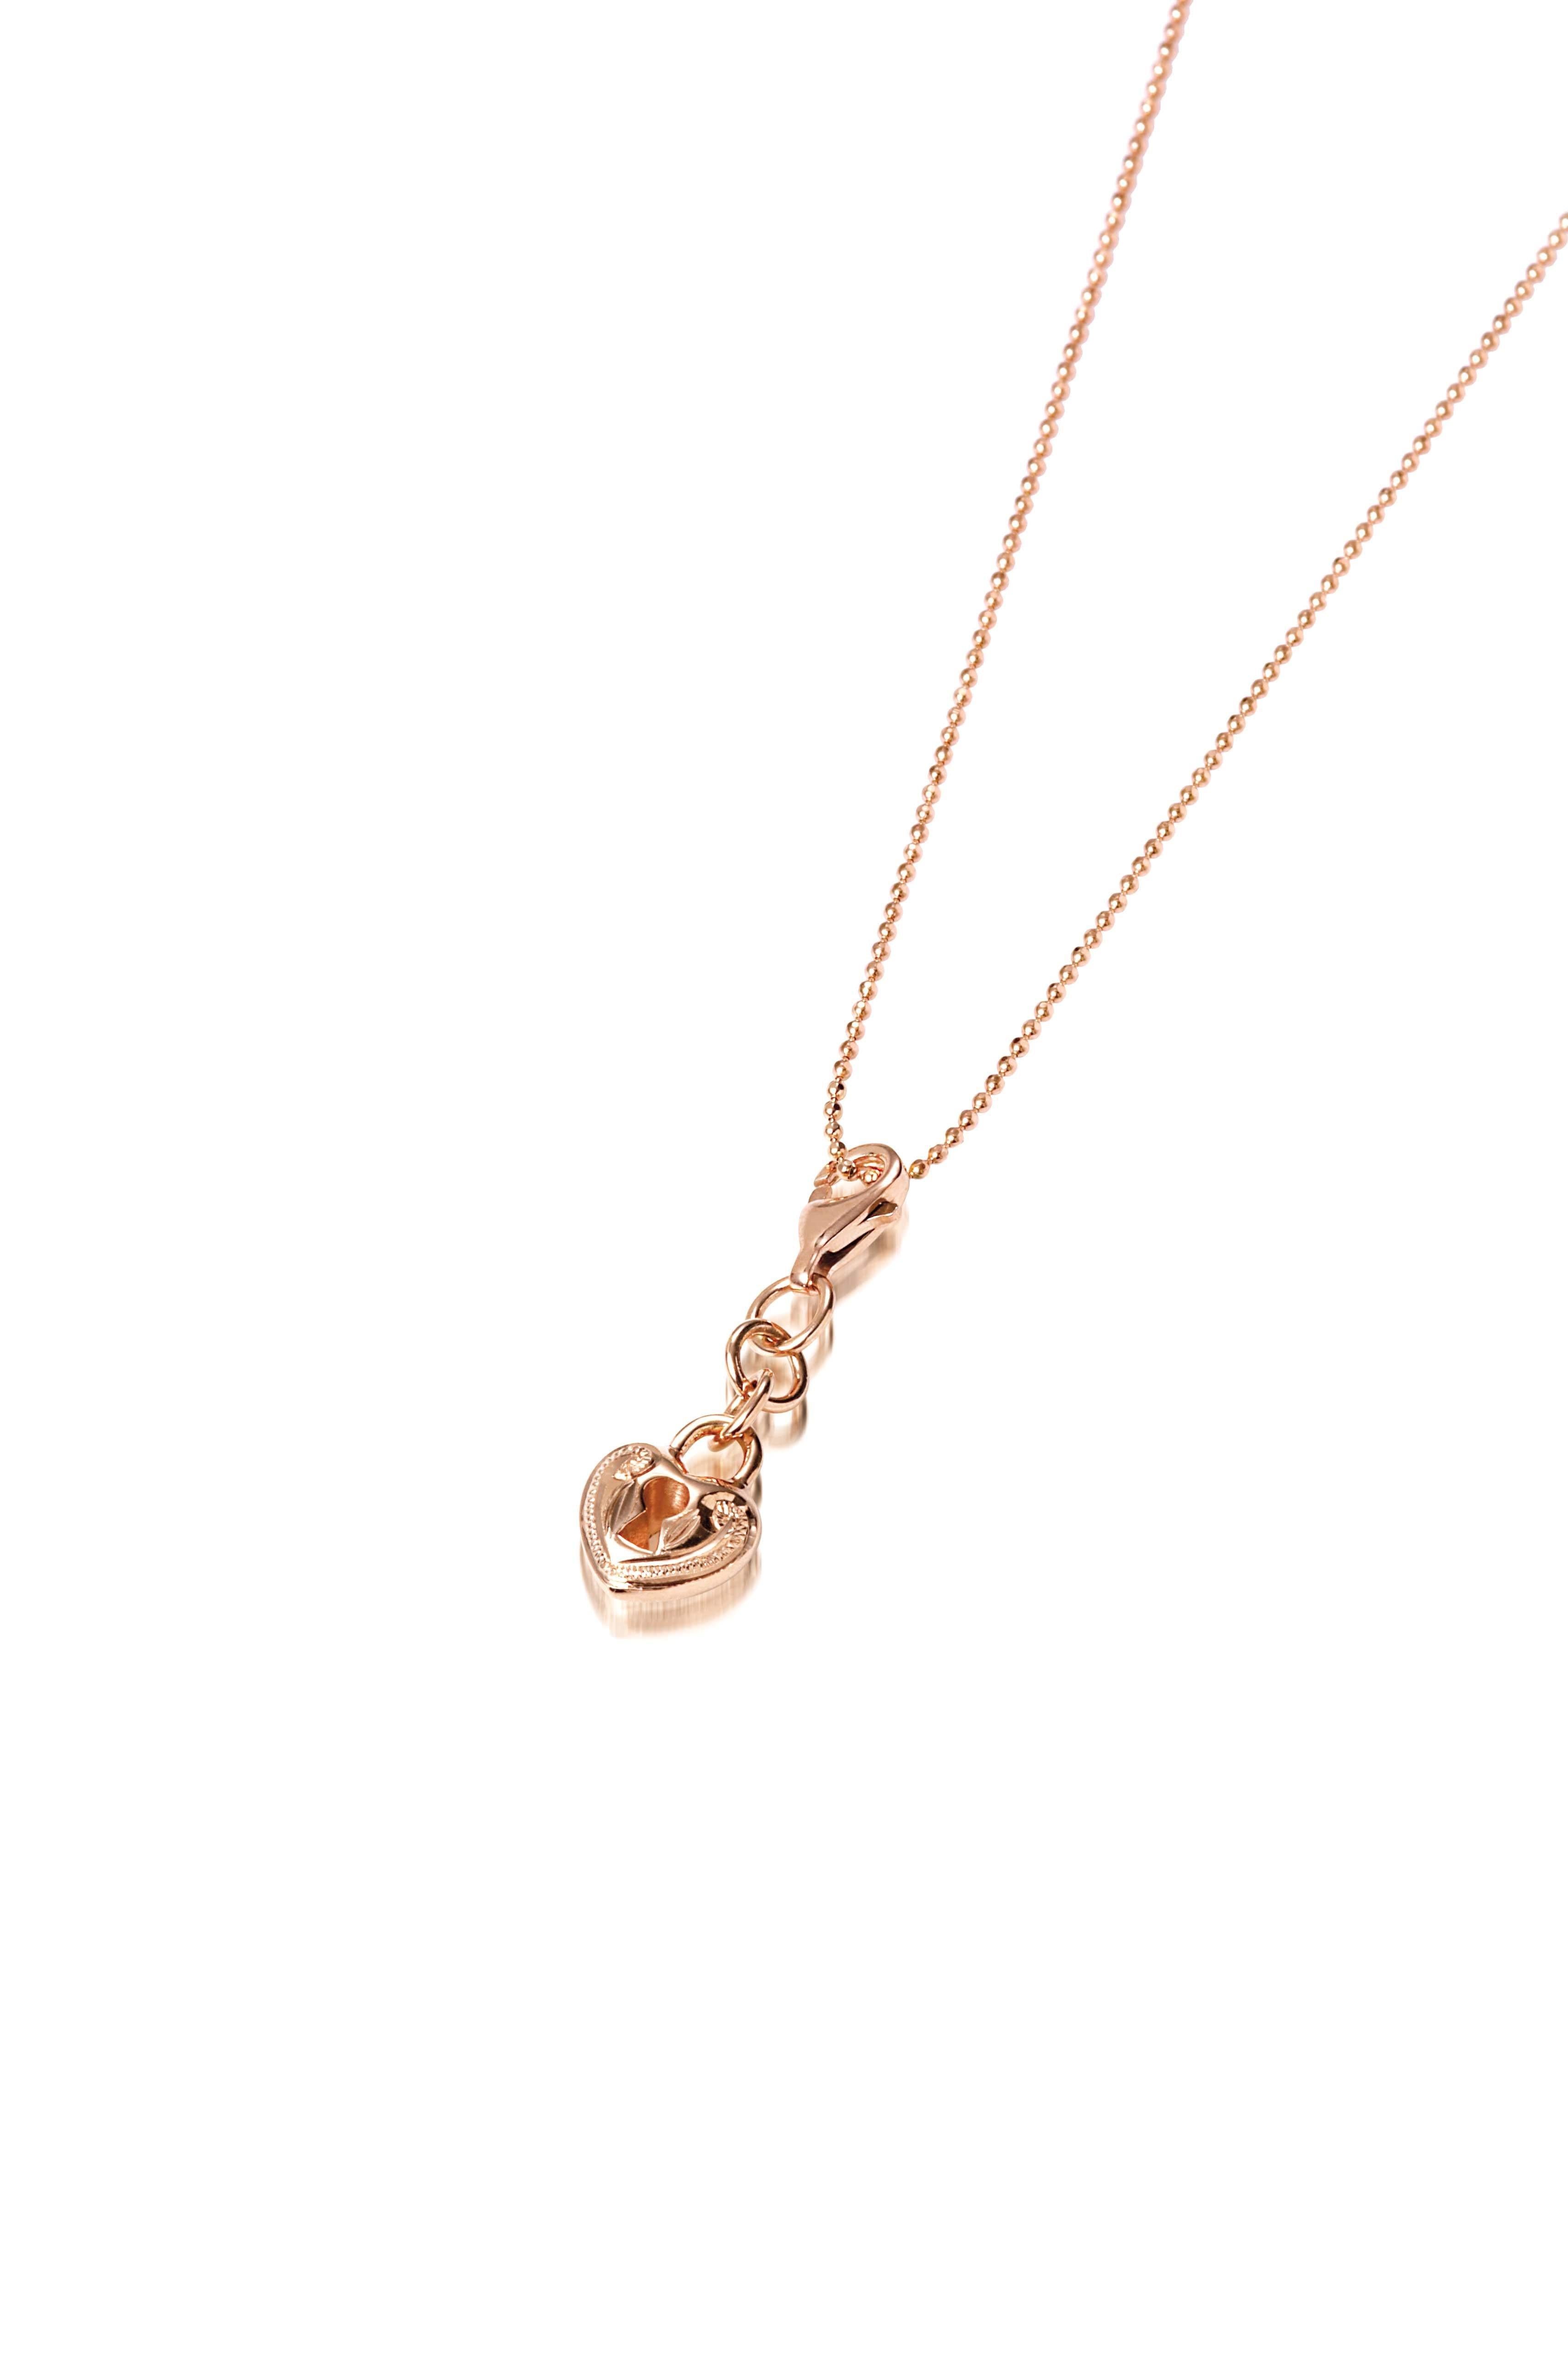 The picture shows a 14K rose gold heart Lock charm with hand-engraved detailing.